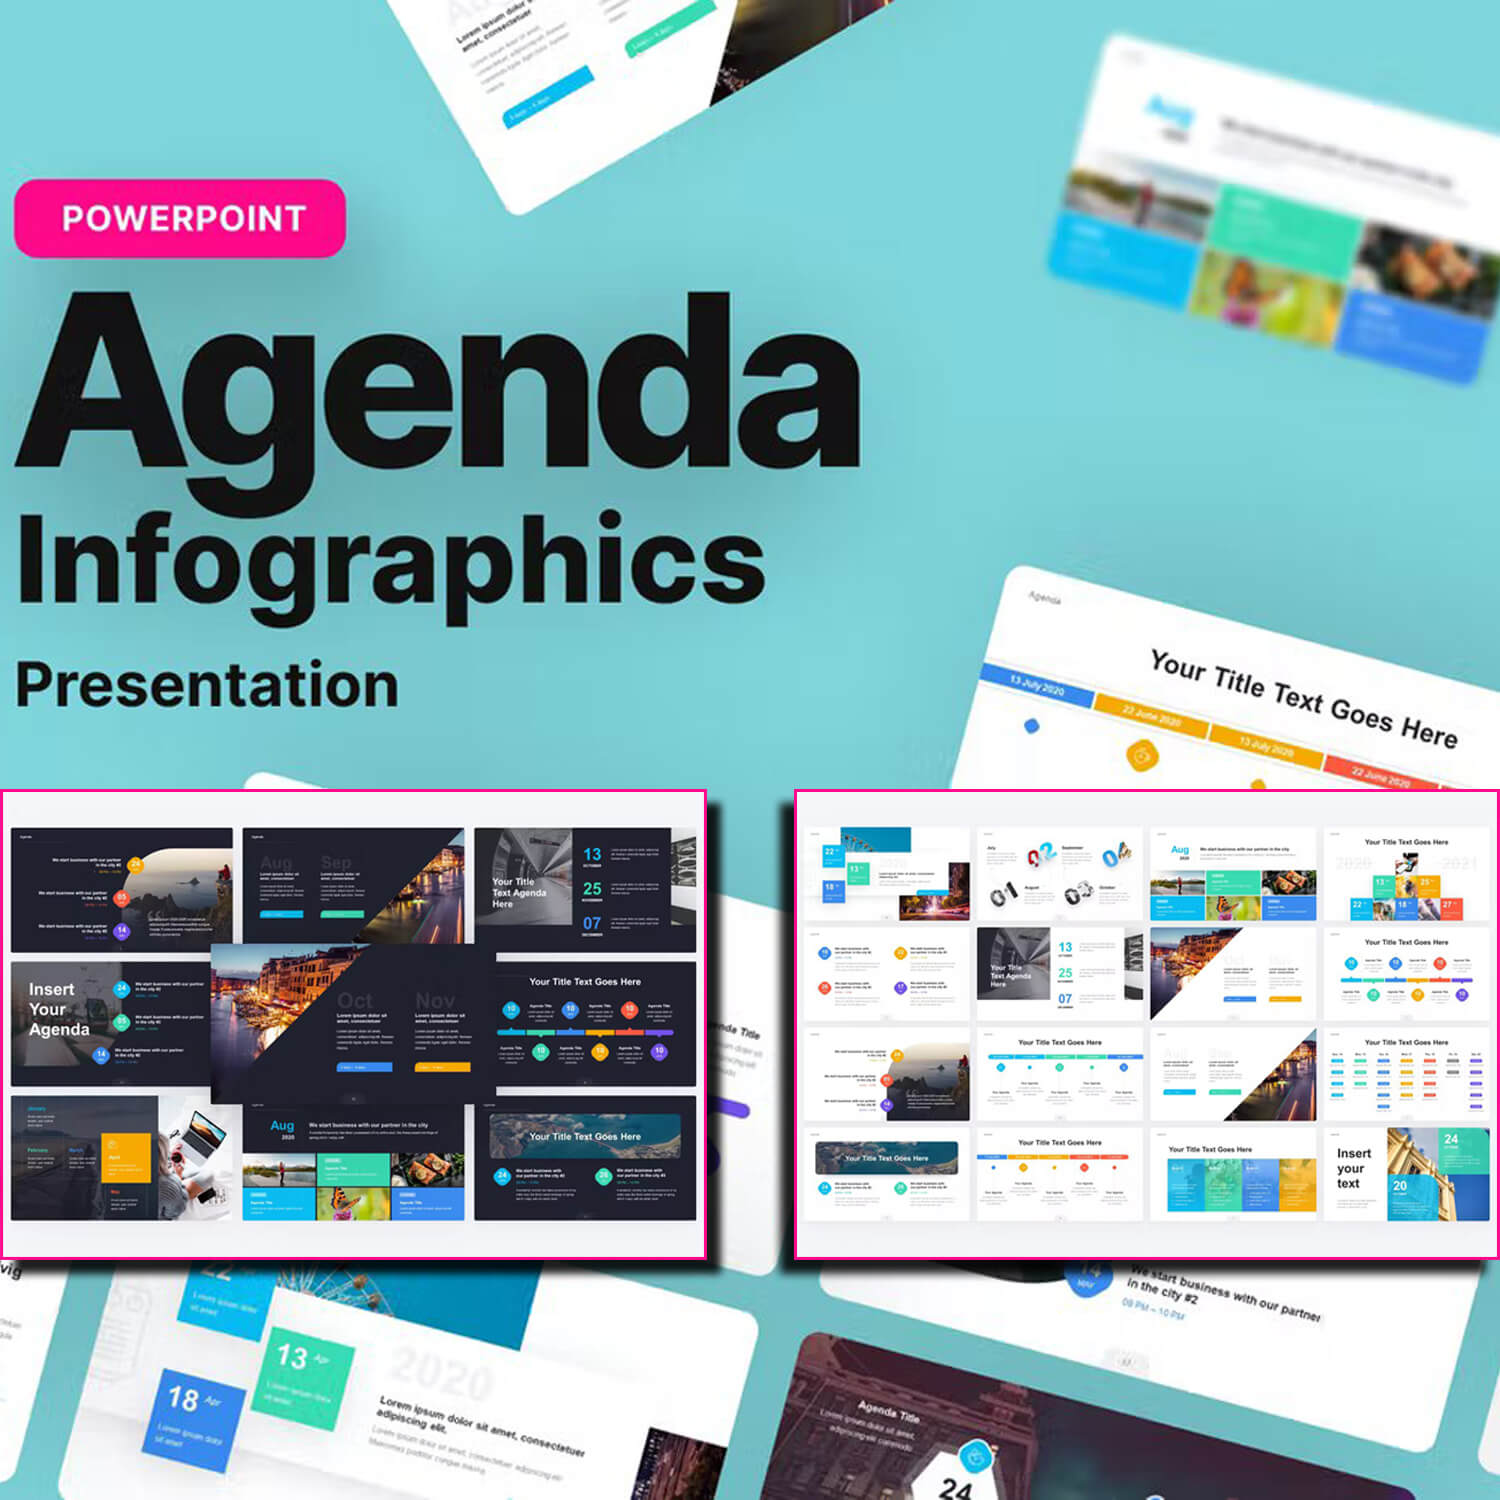 Inscription "Your title text goes here" of Agenda Planner Infographic PowerPoint Template.